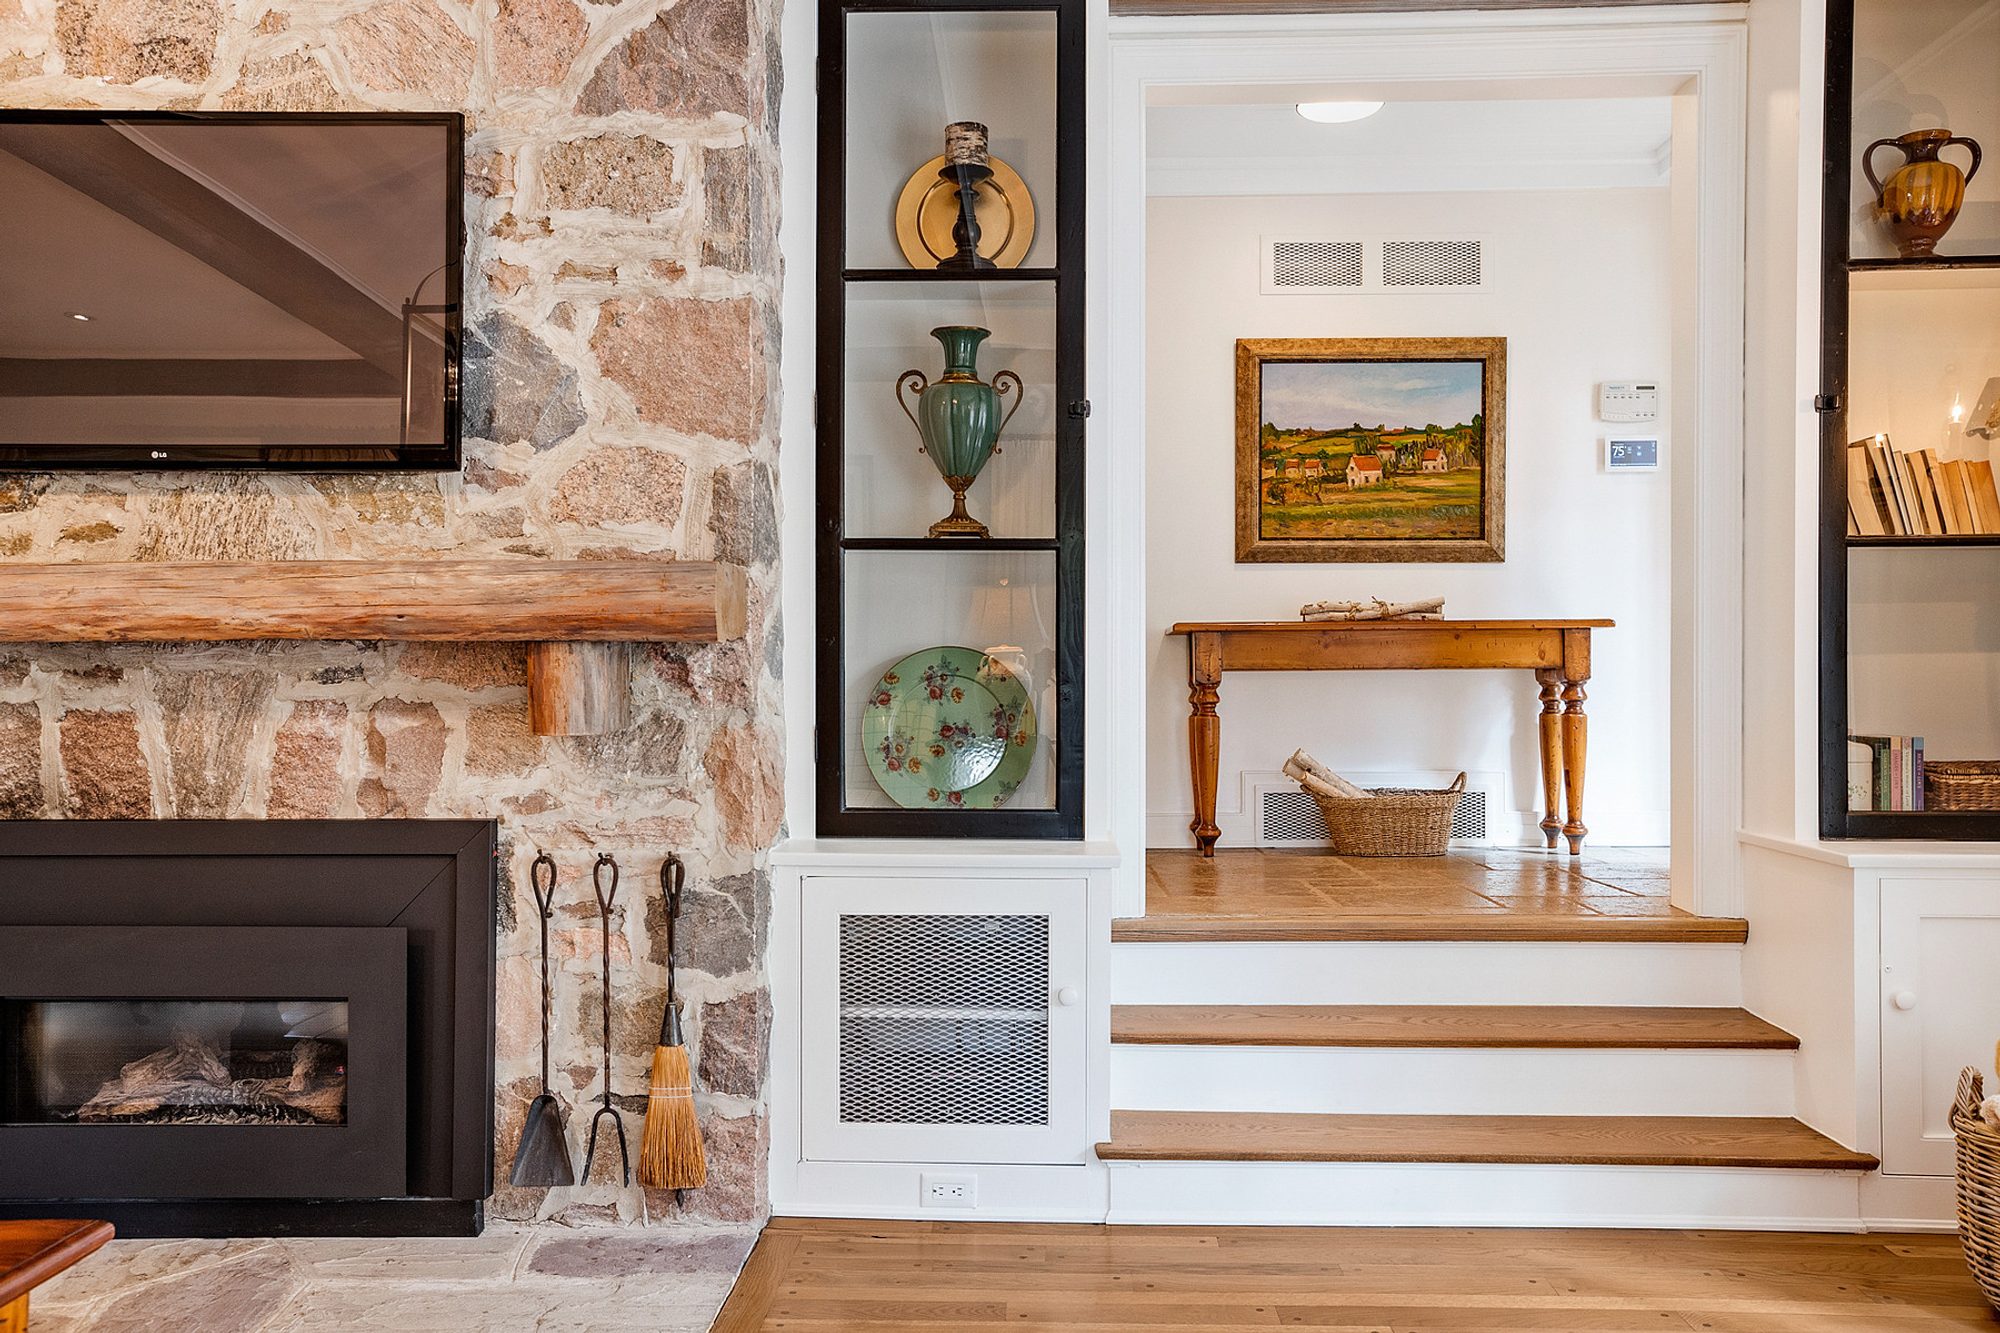 Rustic style real stone fireplace surround in a Transitional home with wide grout lines.